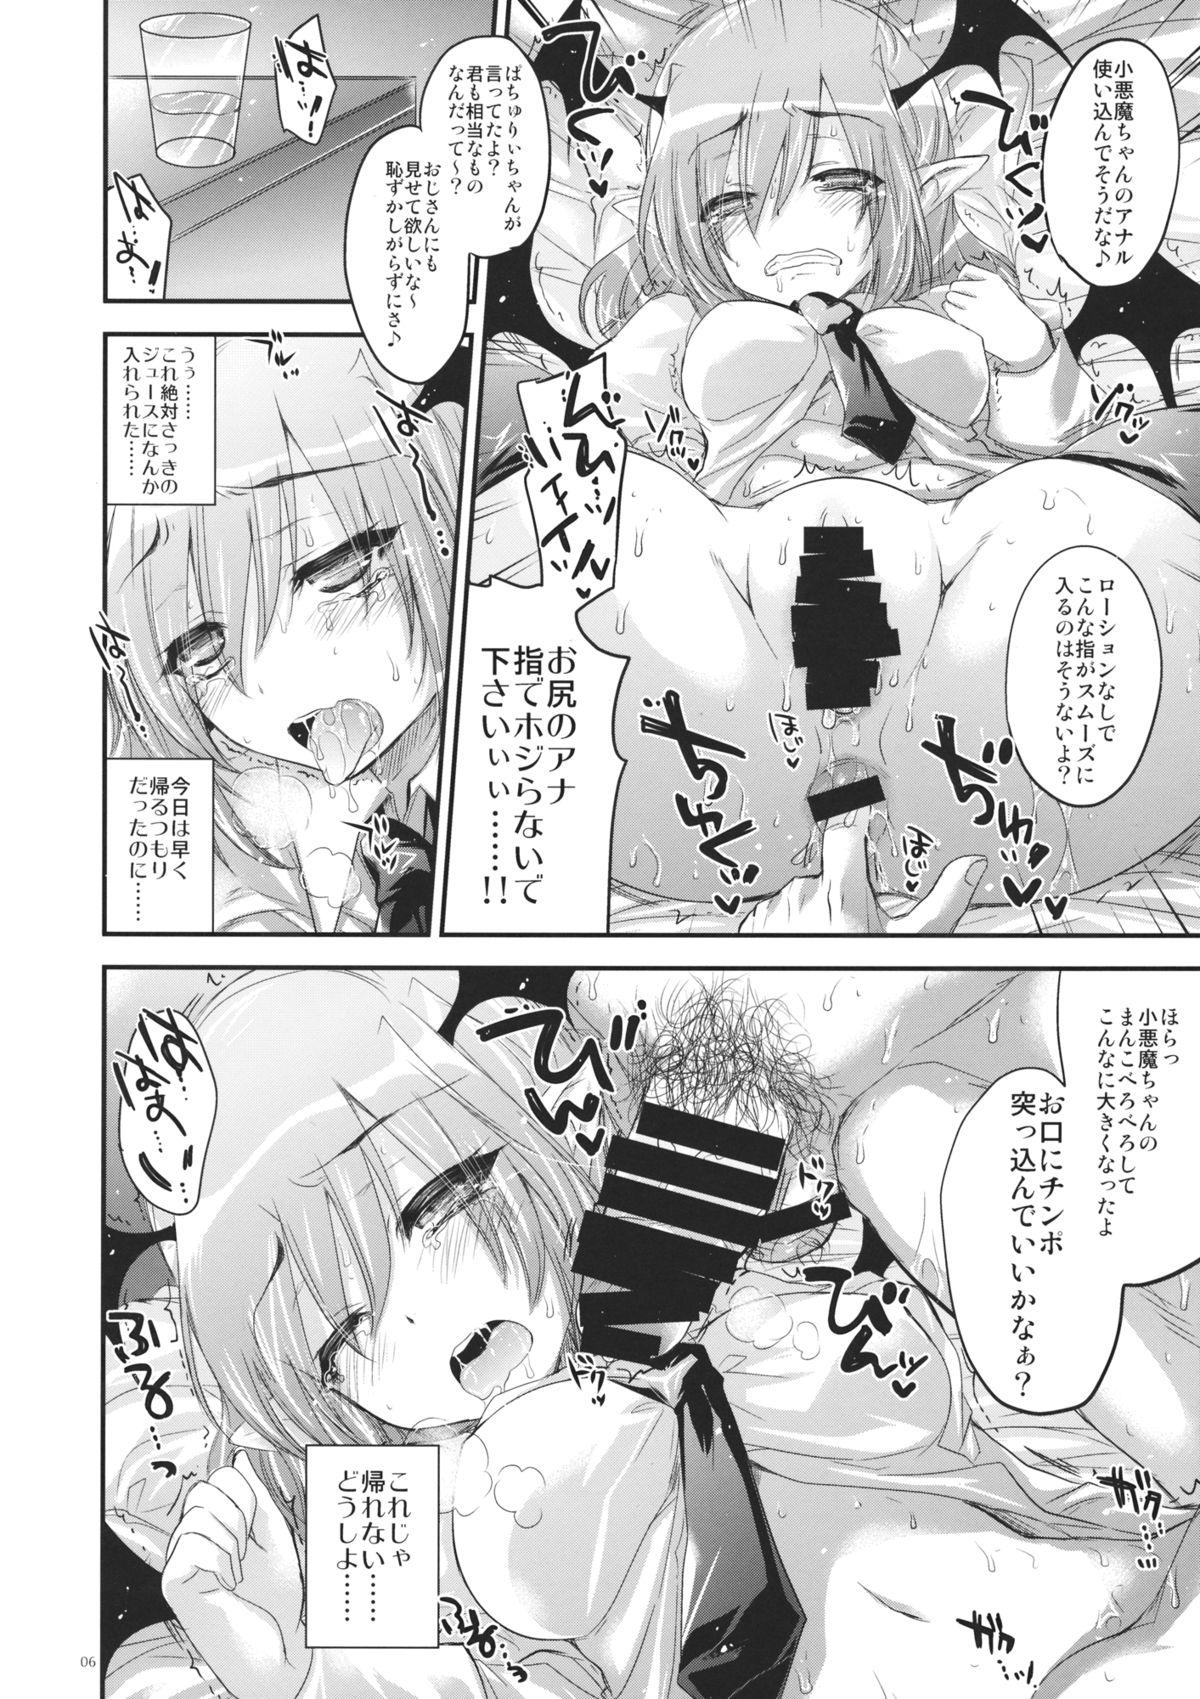 Pov Sex GARIGARI 57 - Touhou project Off - Page 5